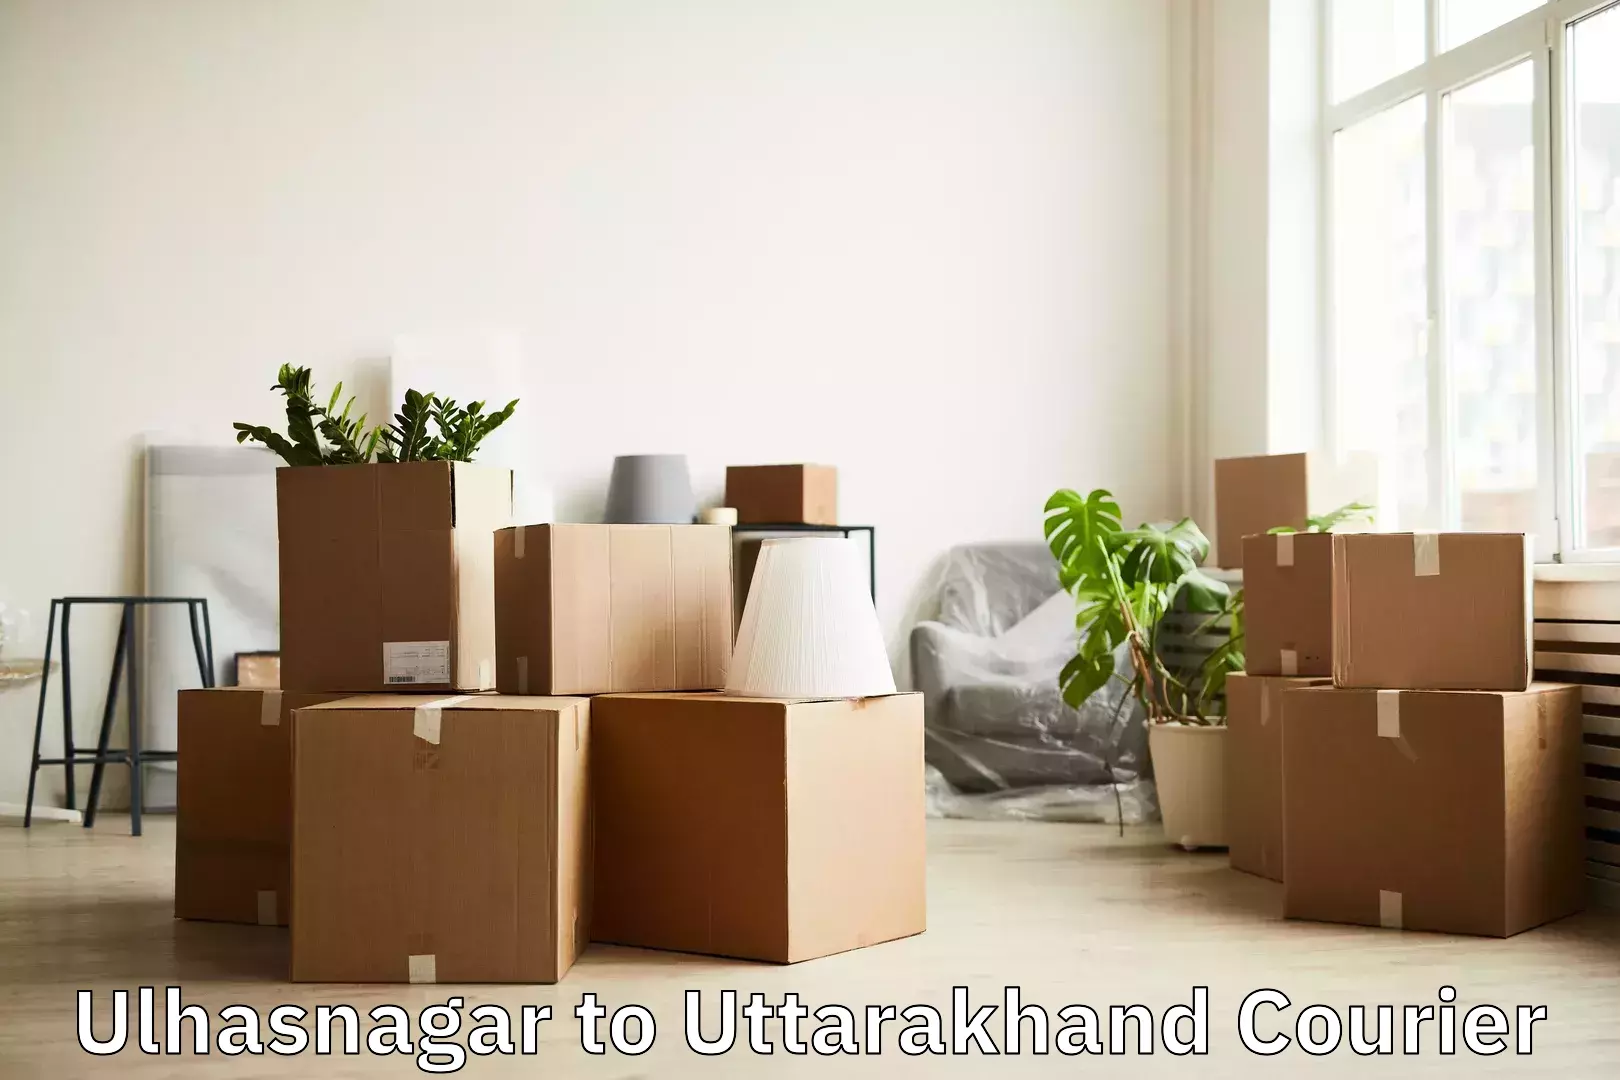 Instant baggage transport quote Ulhasnagar to Pithoragarh